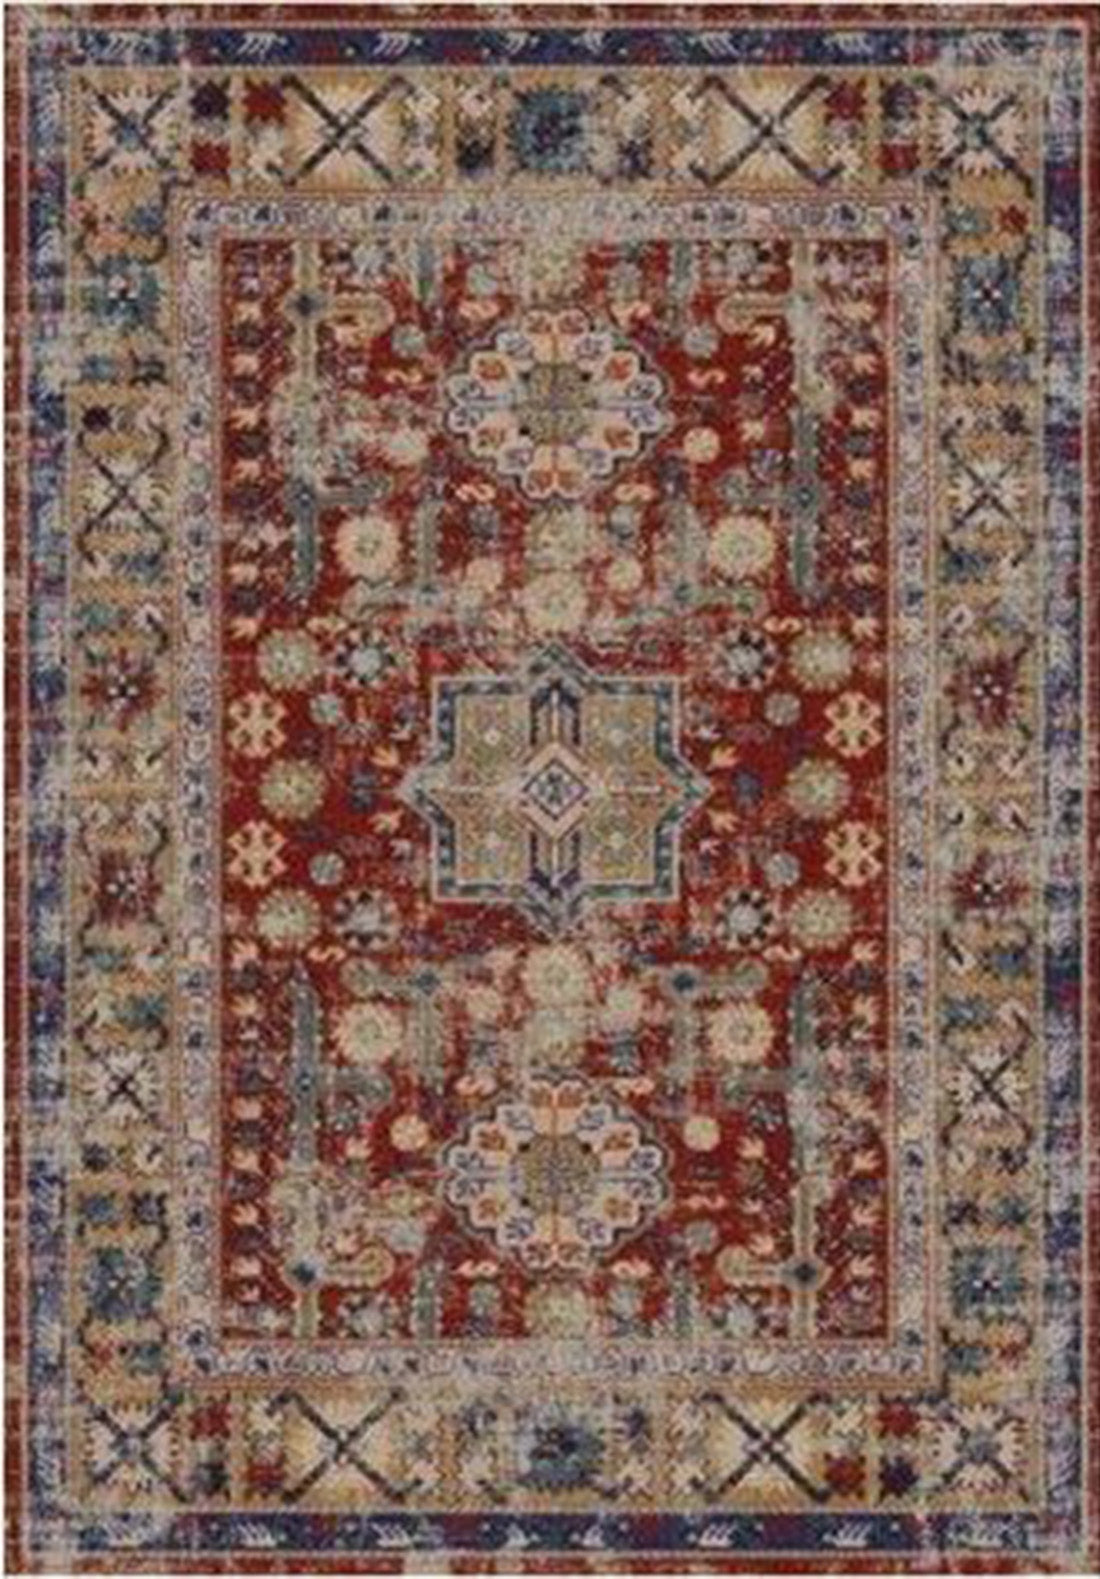 dt45214101 b rug 5x7, 5x8 ft Contemporary, Living Room Carpet, Bedroom, Home Office